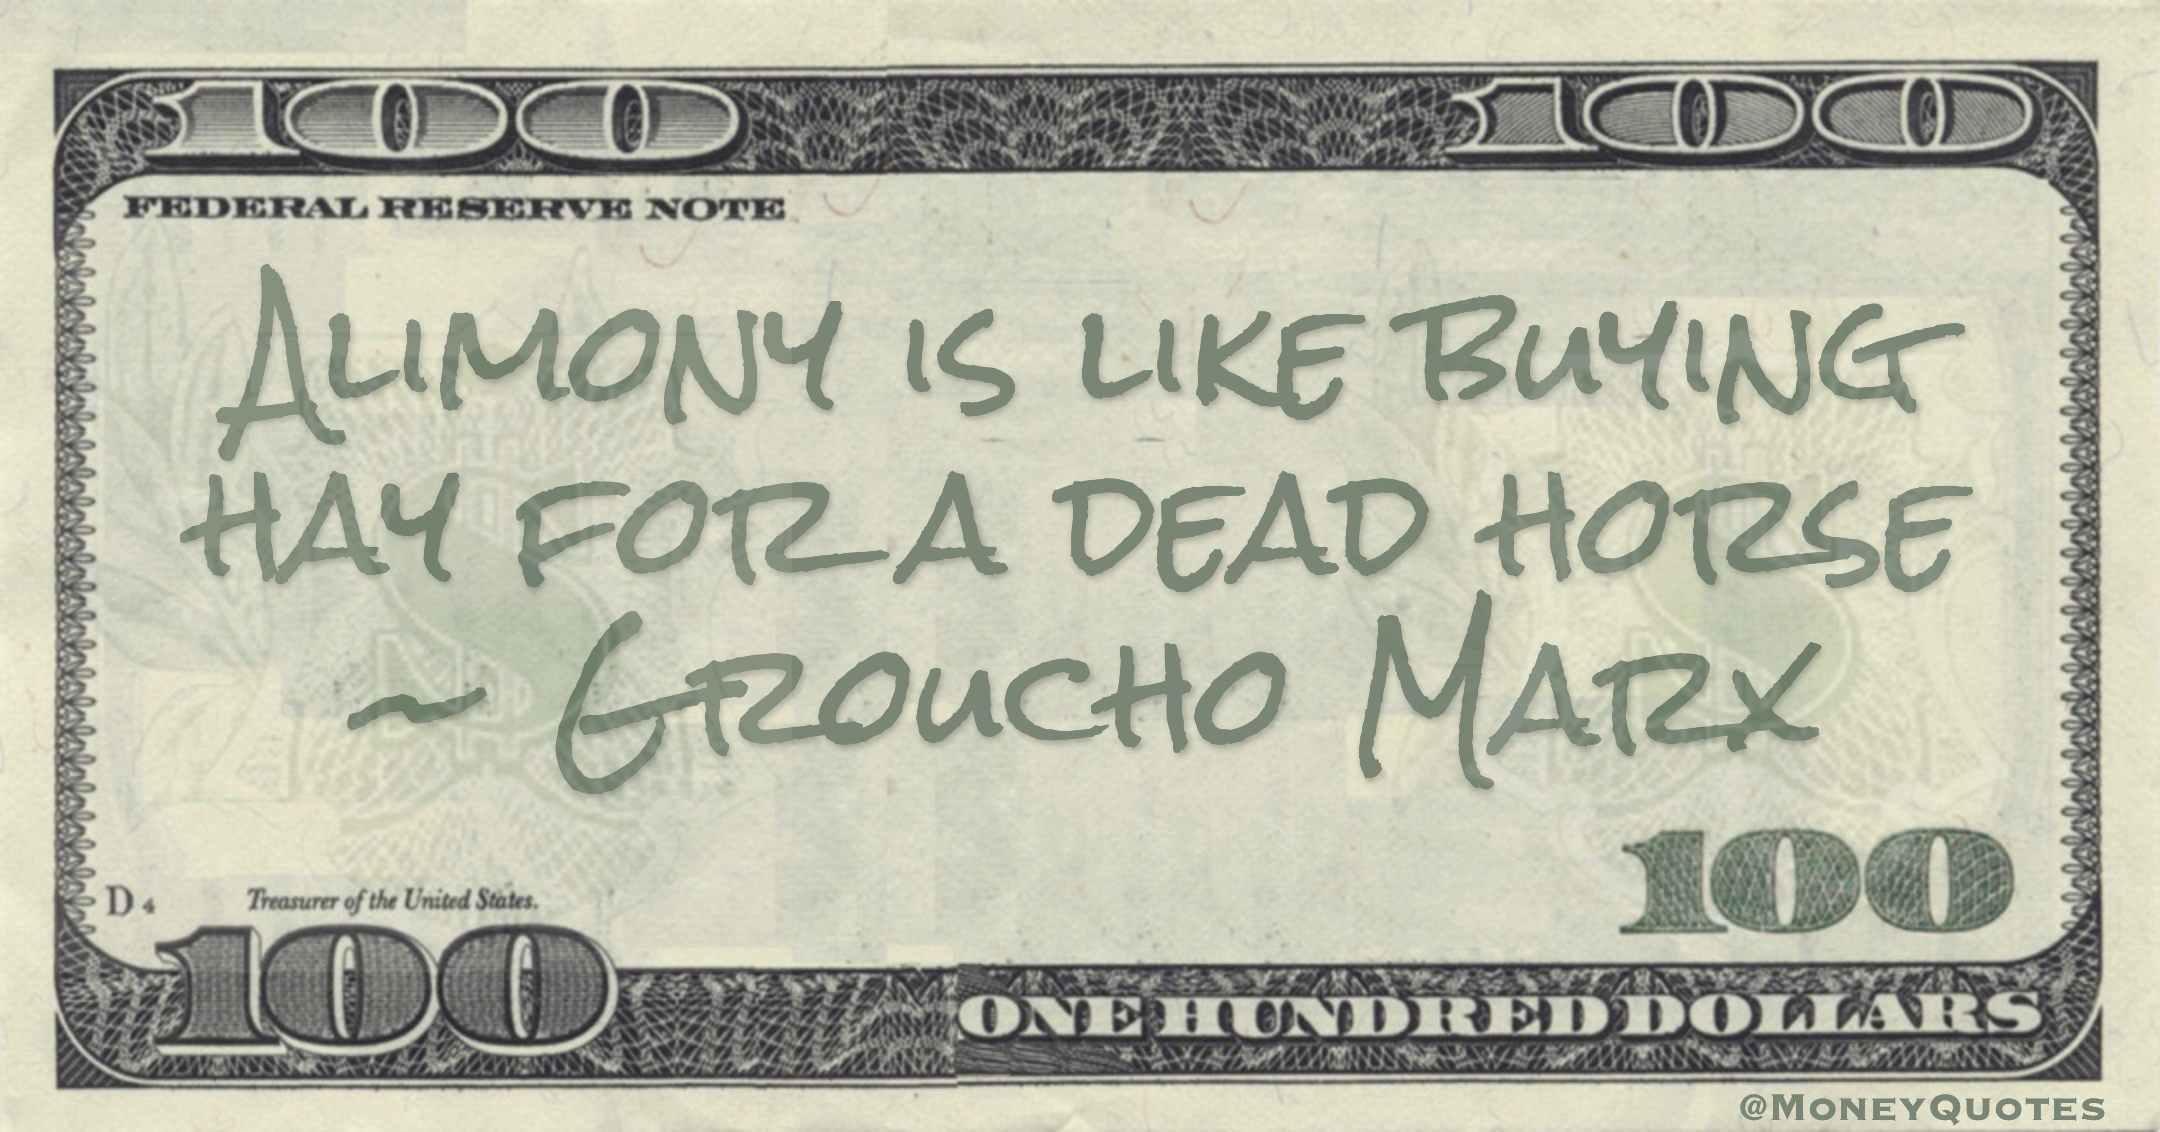 Alimony is like buying hay for a dead horse Quote